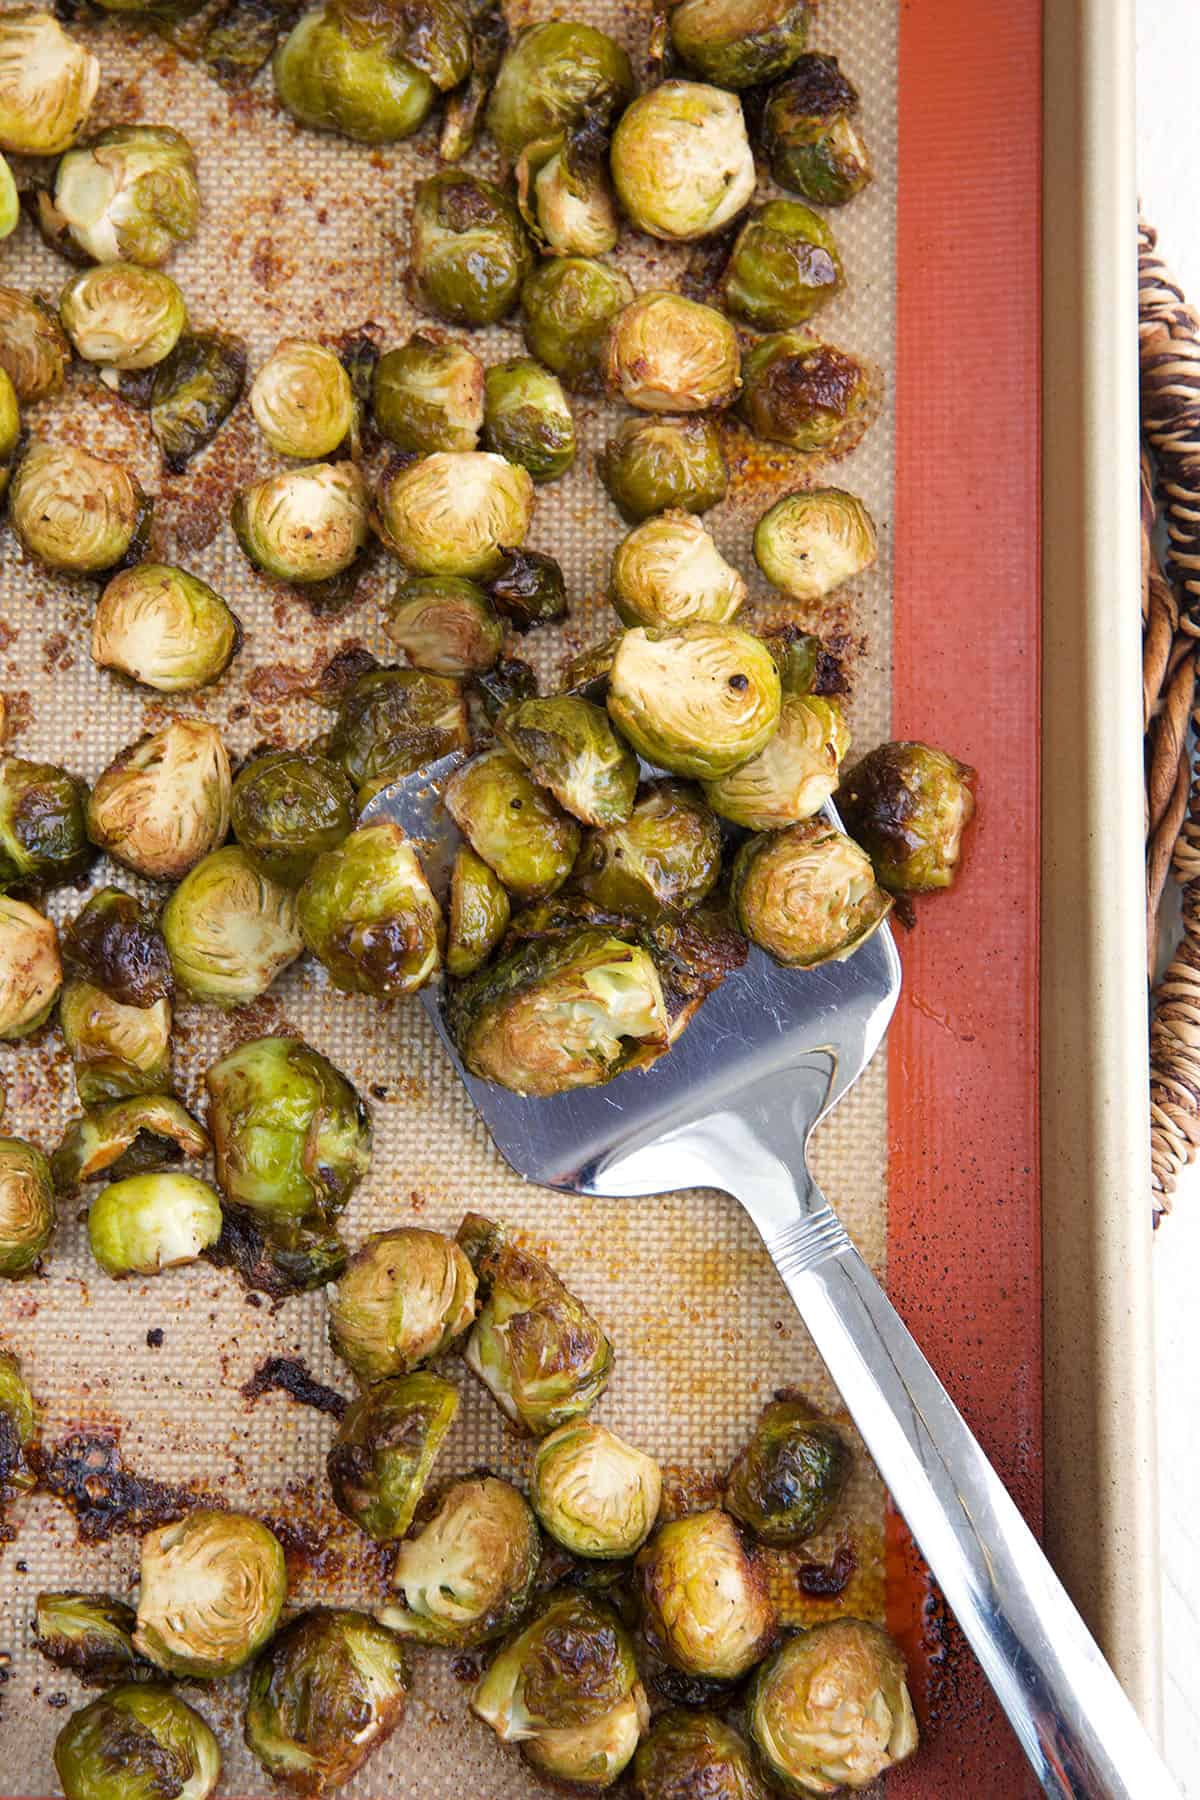 A spatula is lifting a small portion of brussel sprouts from a baking sheet.